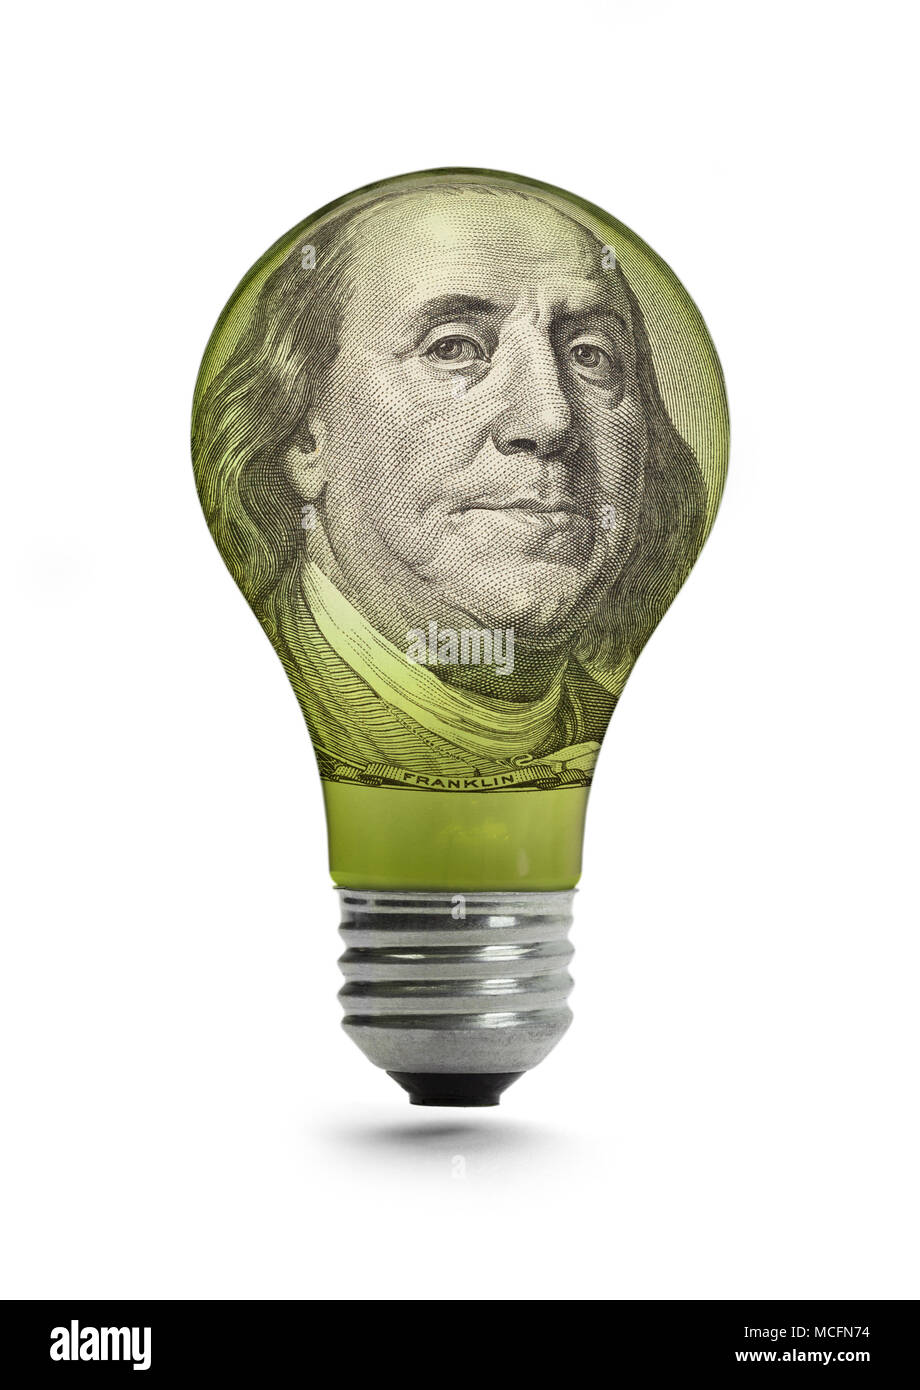 Money Light Bulb with Franklin Isolated on White Background. Stock Photo